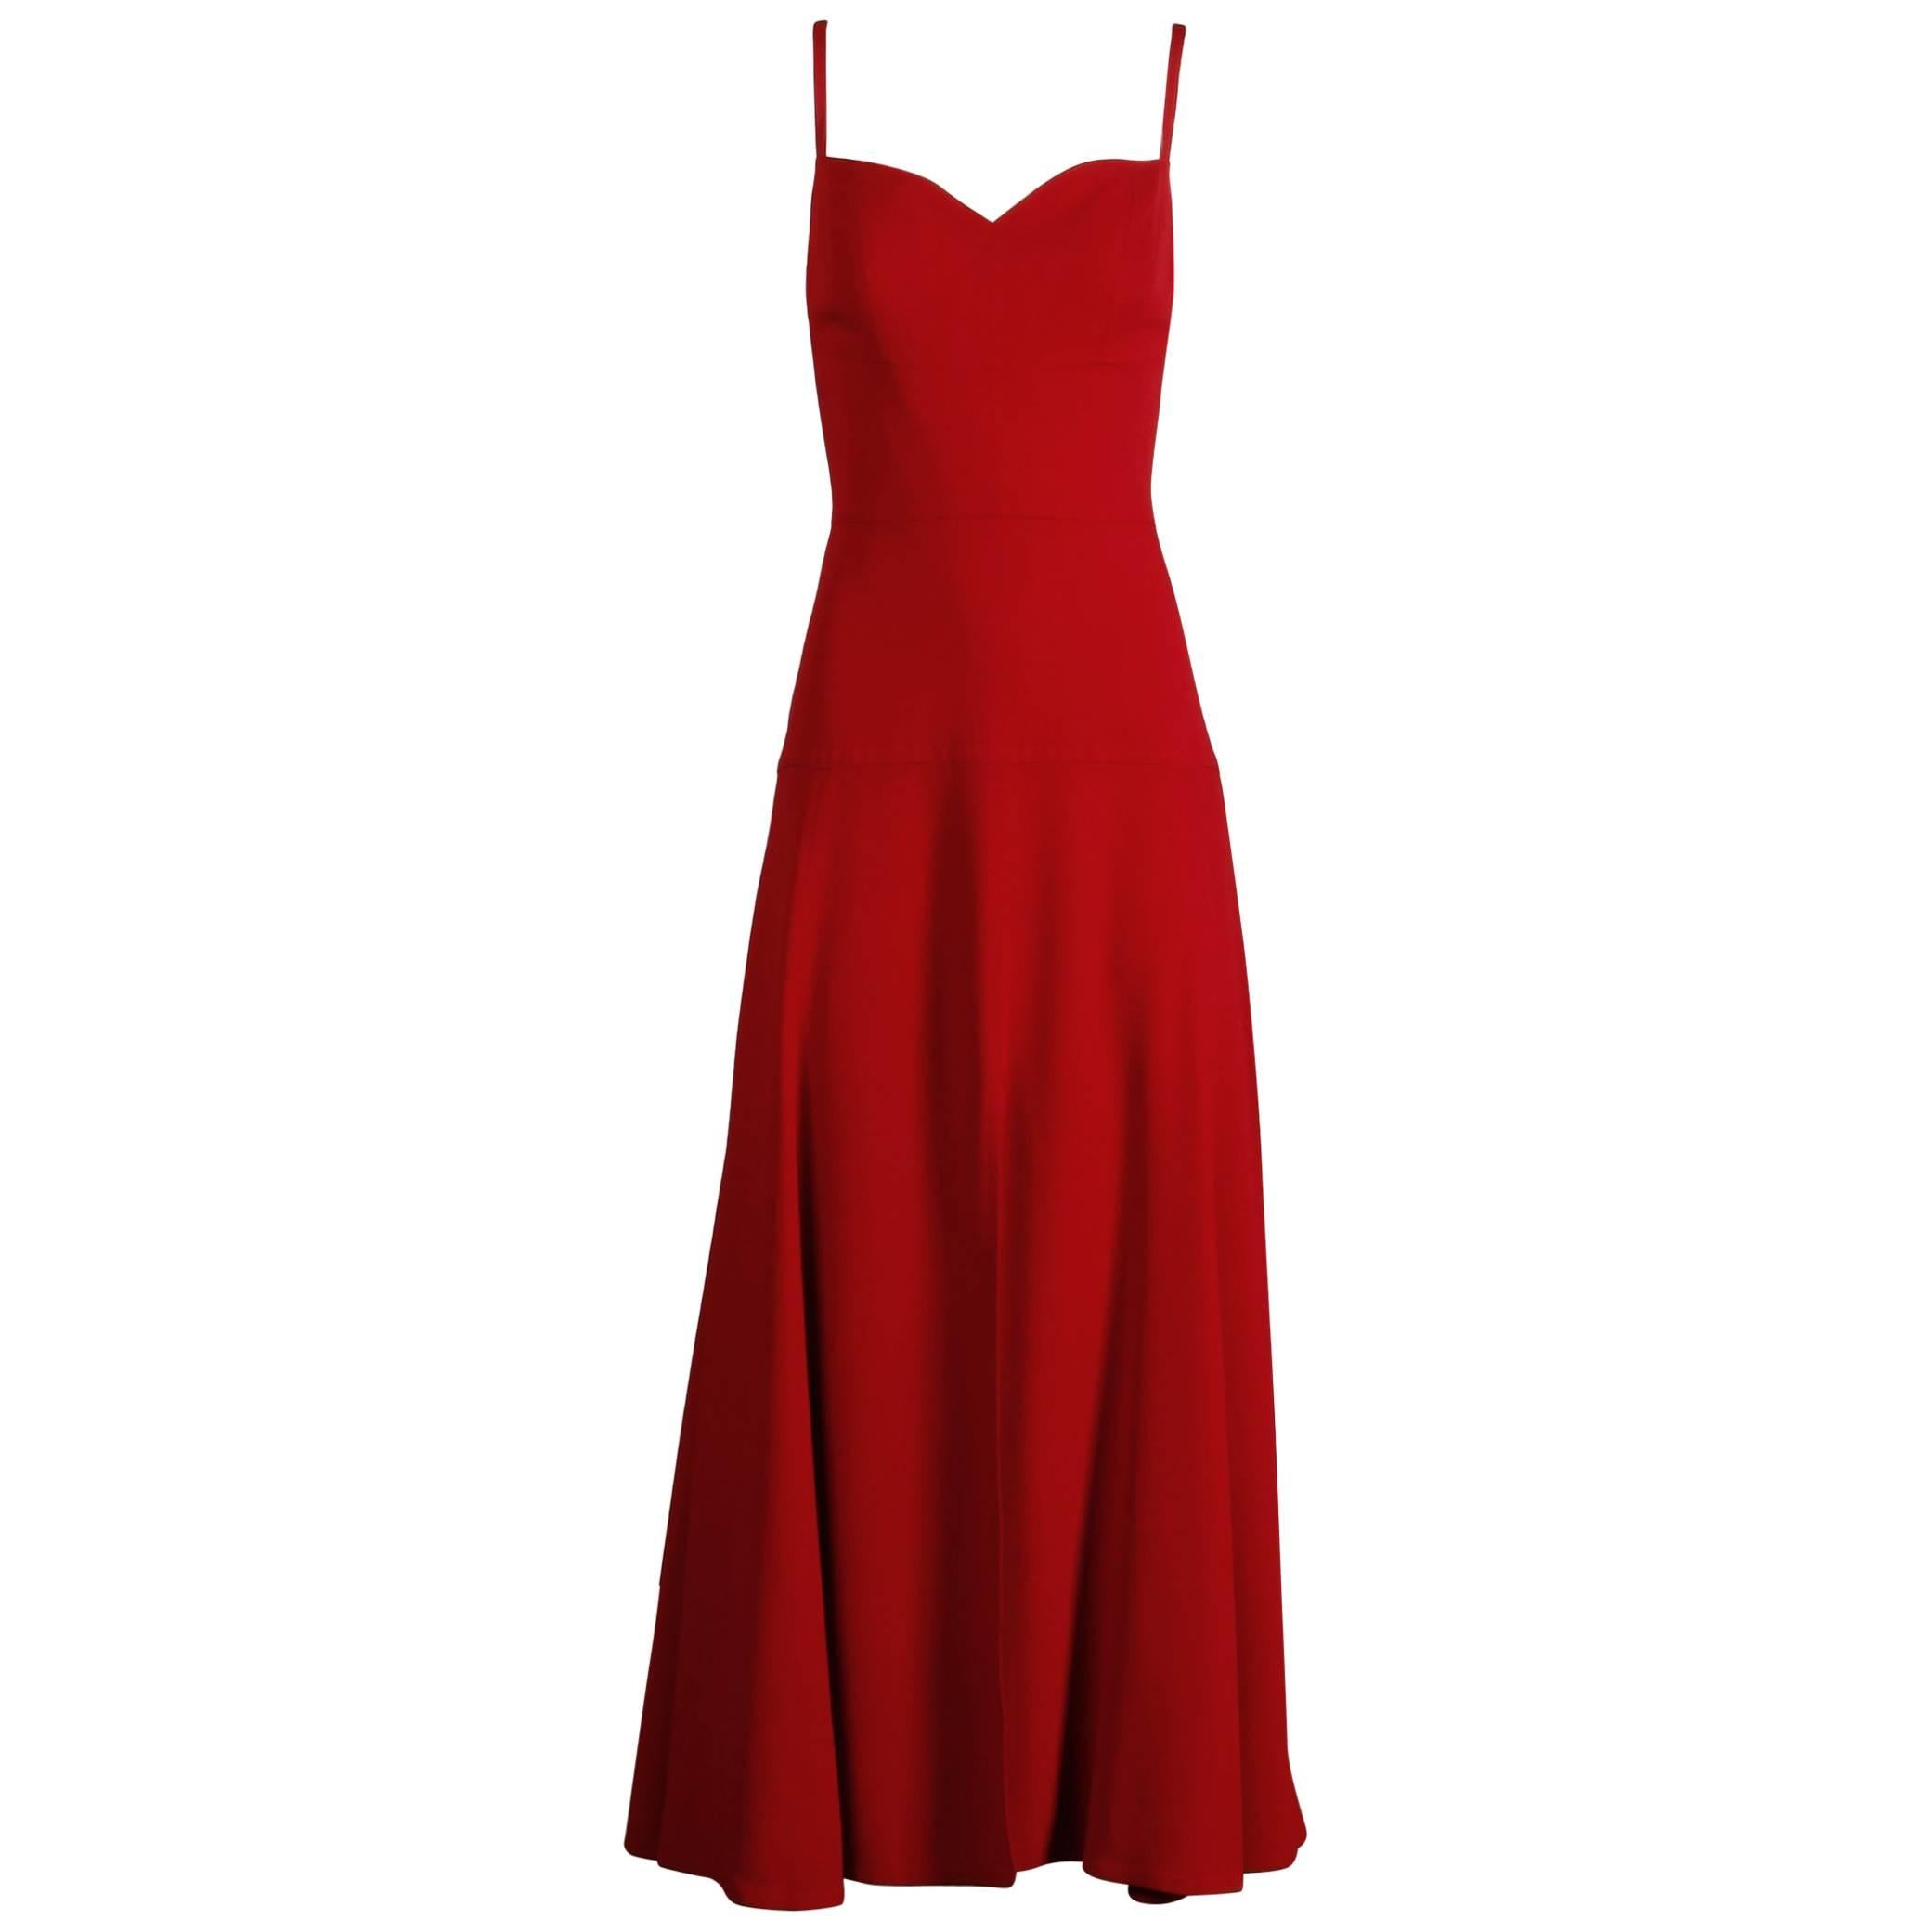 1990s State of Claude Montana Vintage Long Red Dress with Front Slit